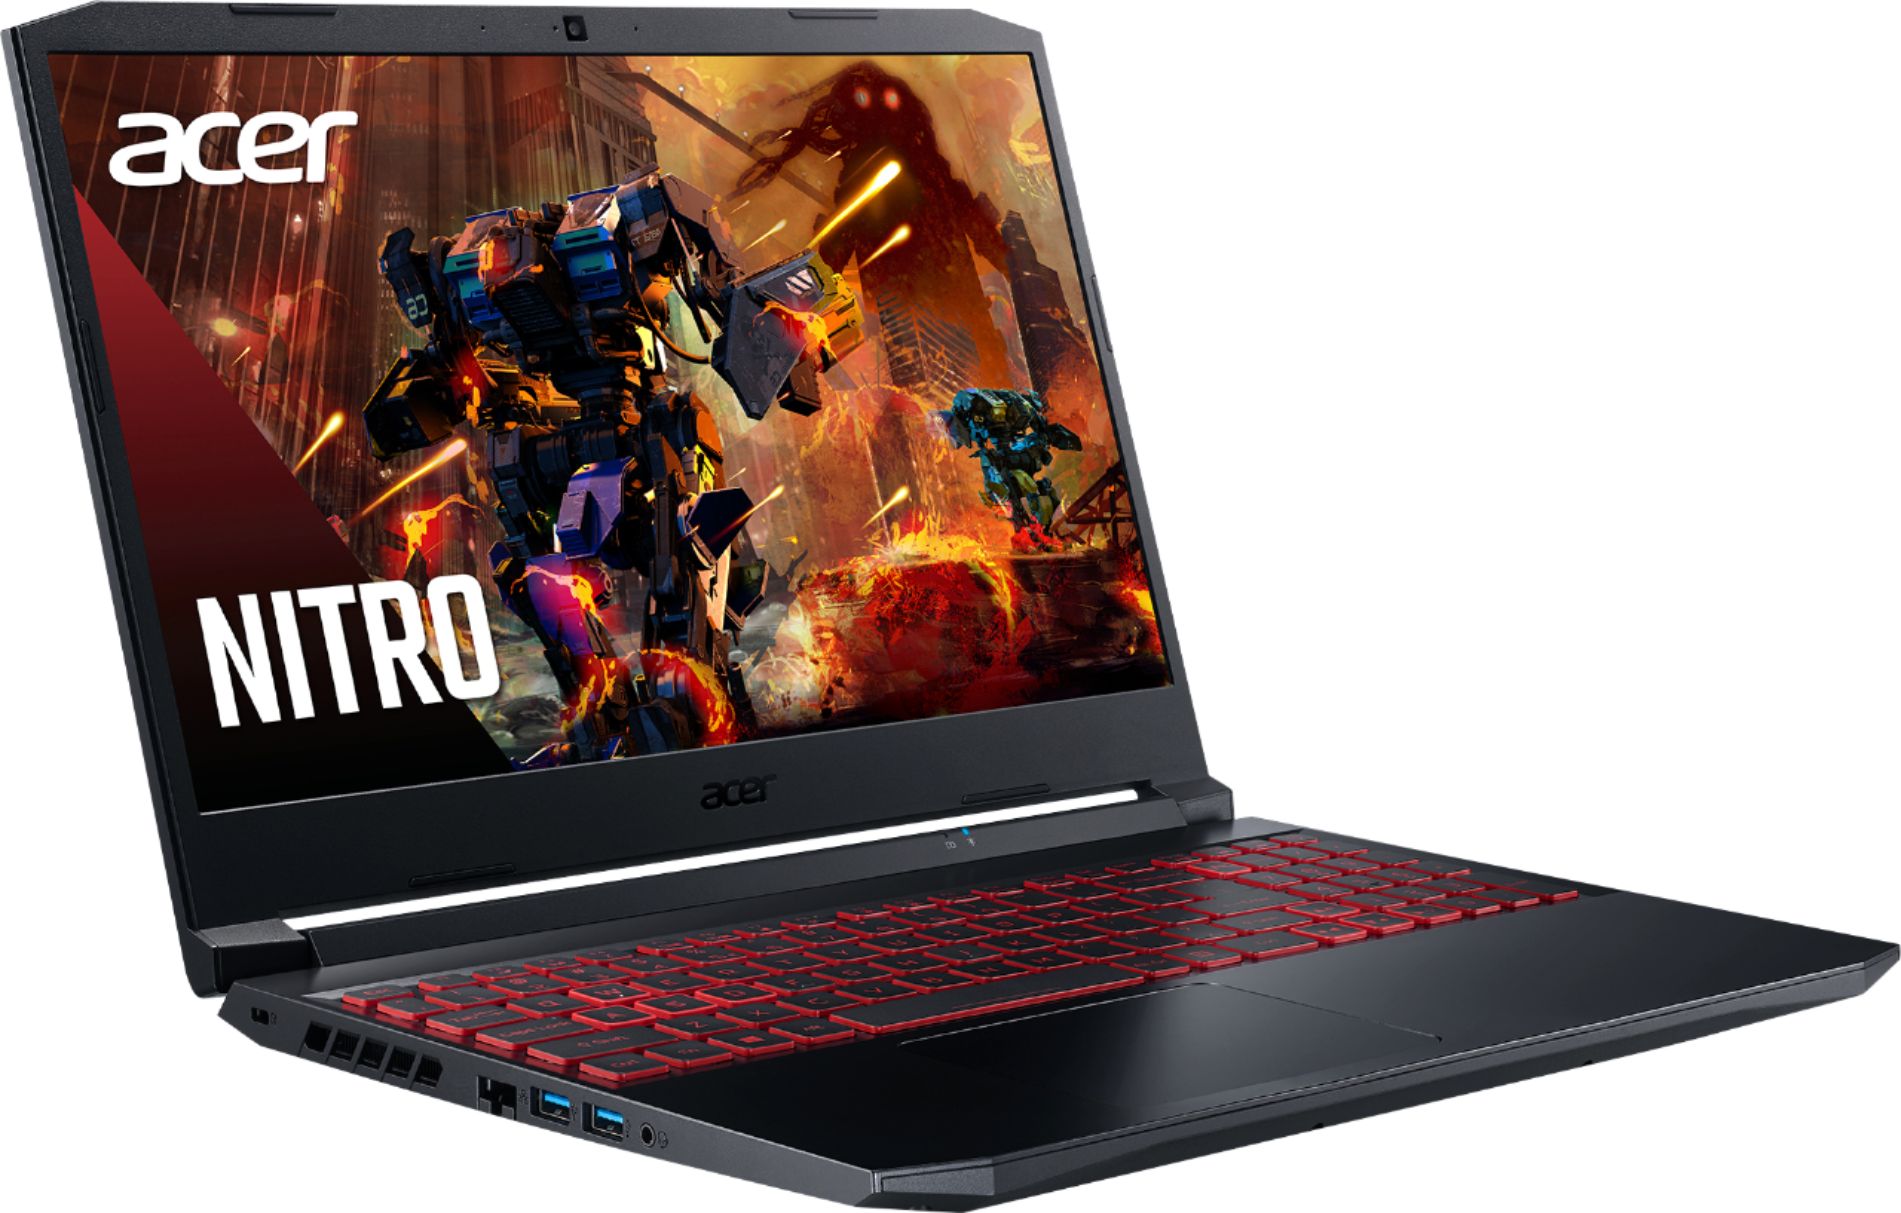 Angle View: Acer - Nitro 5 – Gaming Laptop - 15.6" FHD – 11th Gen Intel Core i5 - NVIDIA GeForce GTX 1650 - 8GB DDR4 - 256GB SSD